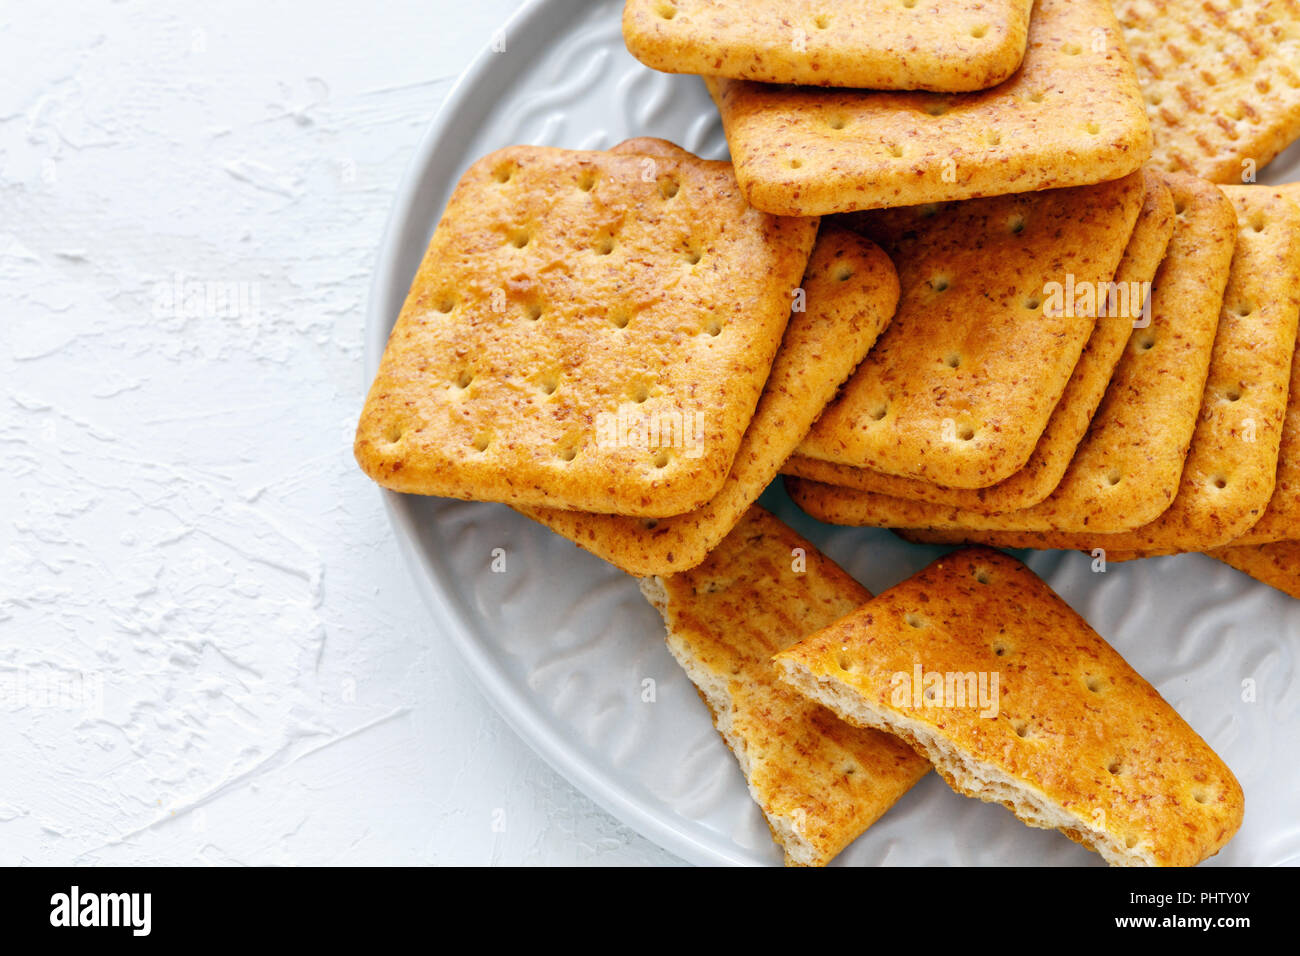 Crunchy crackers with wheat bran. Stock Photo